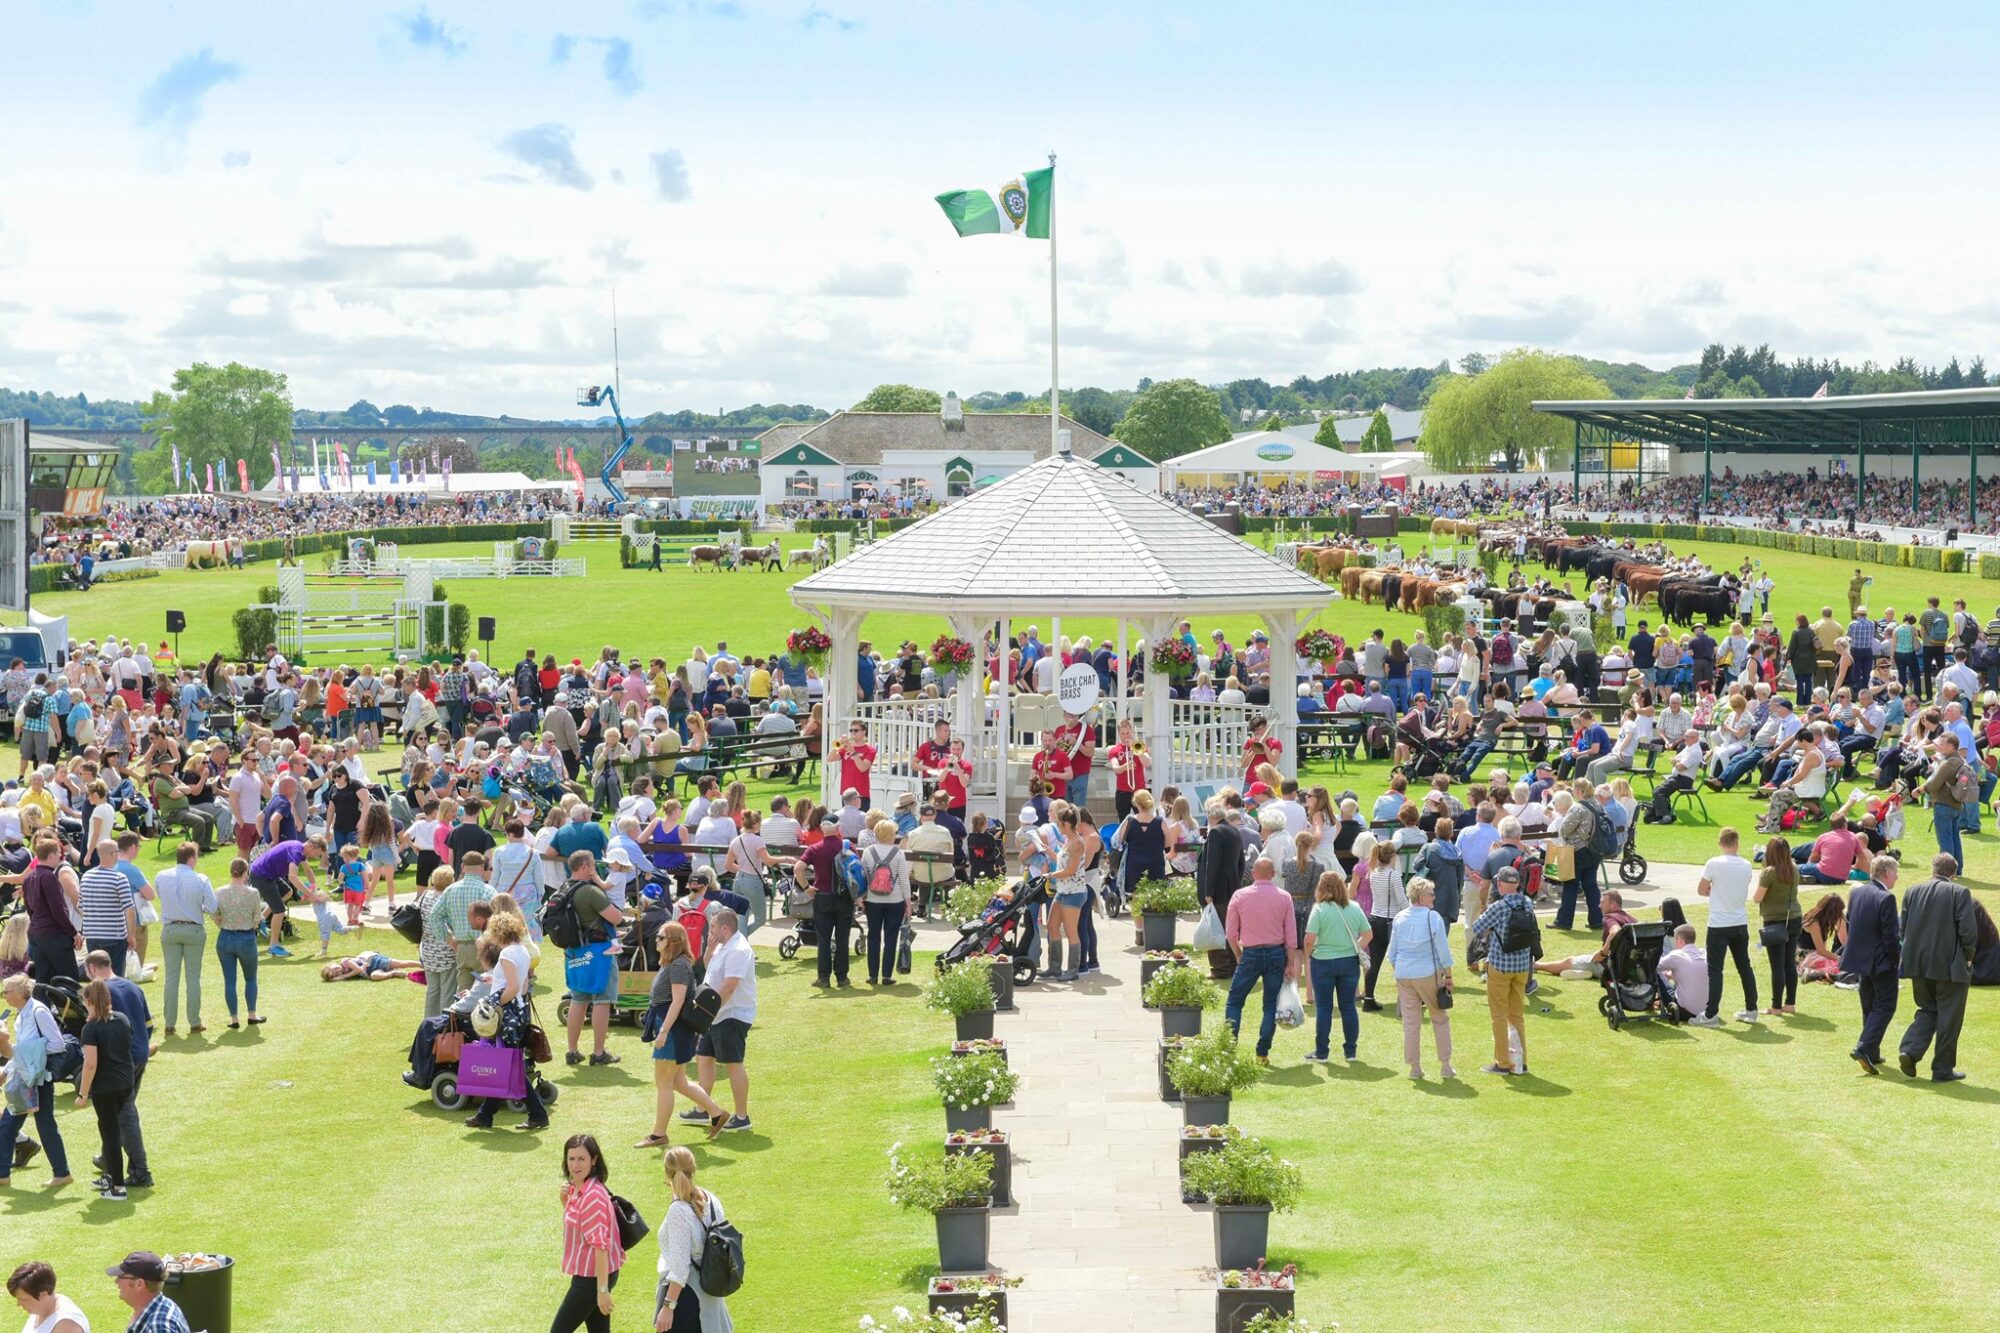 Image name great yorkshire show main ring the 27 image from the post Celebrity farmers attending 2022 Great Yorkshire Show announced in Yorkshire.com.